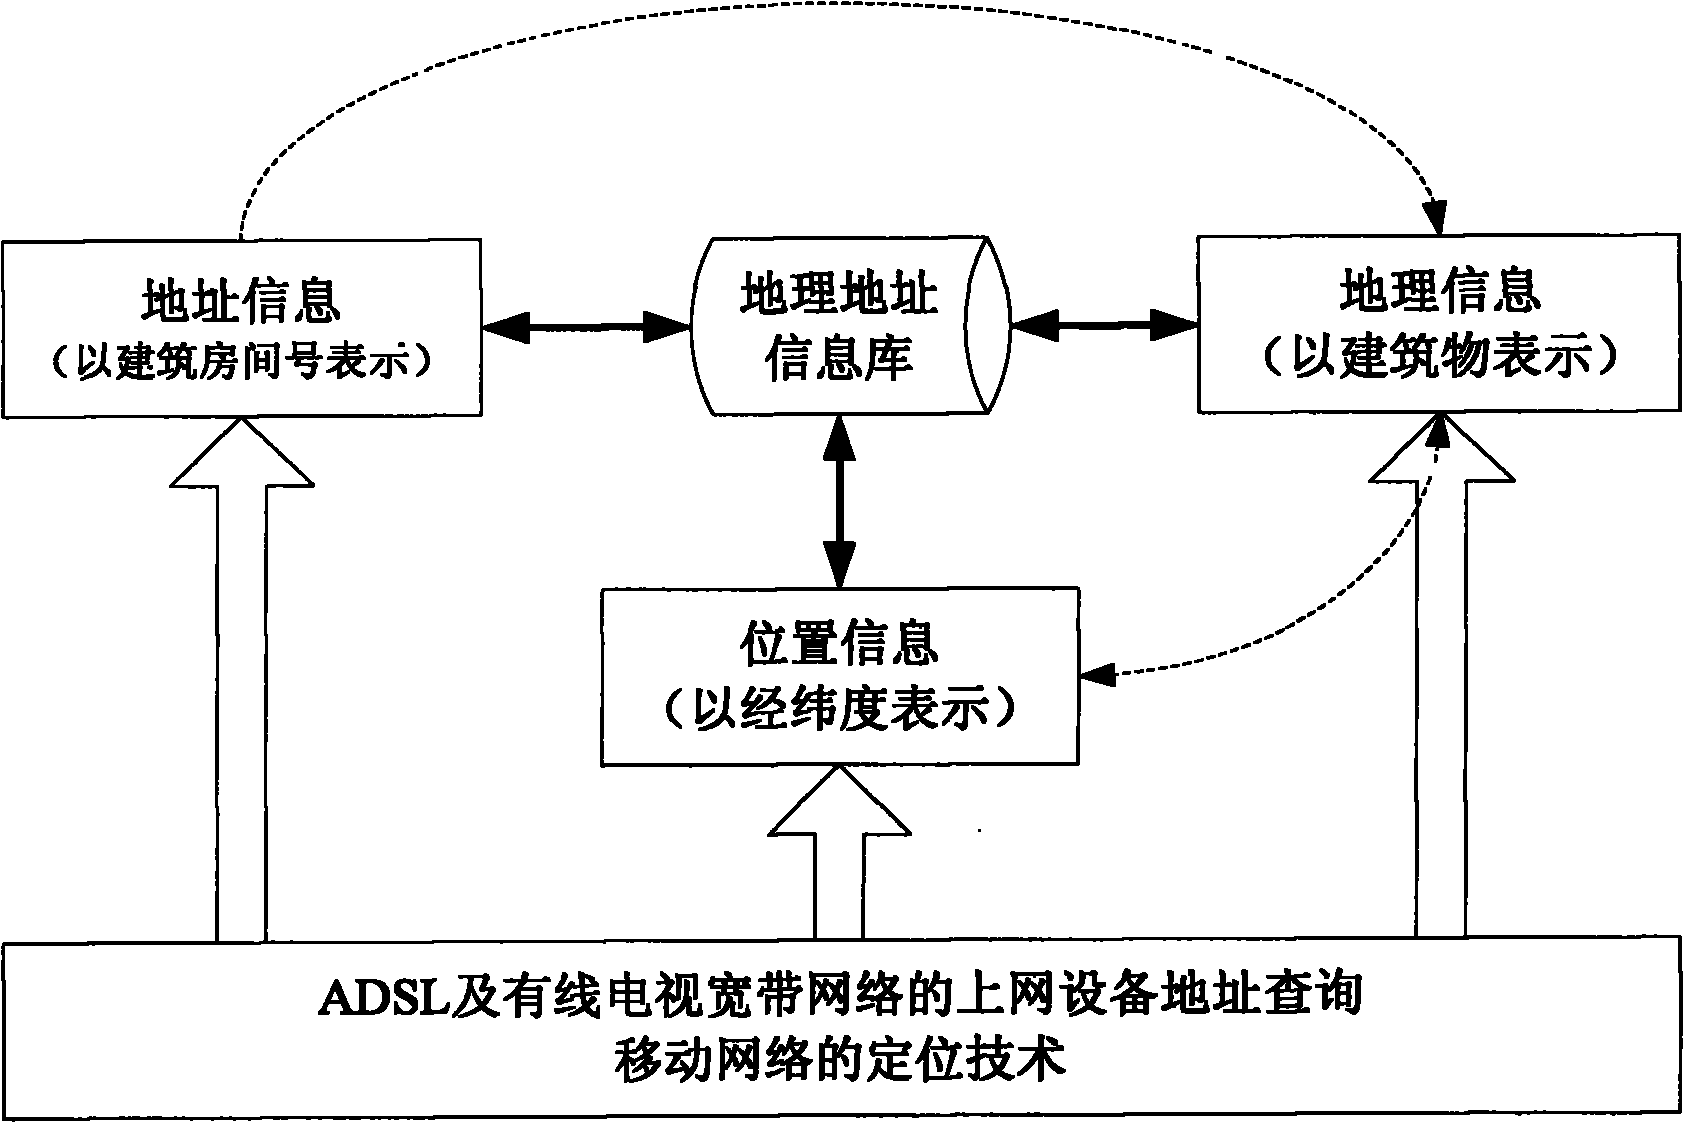 Geographic position-based internet information aggregating, pushing and interacting method